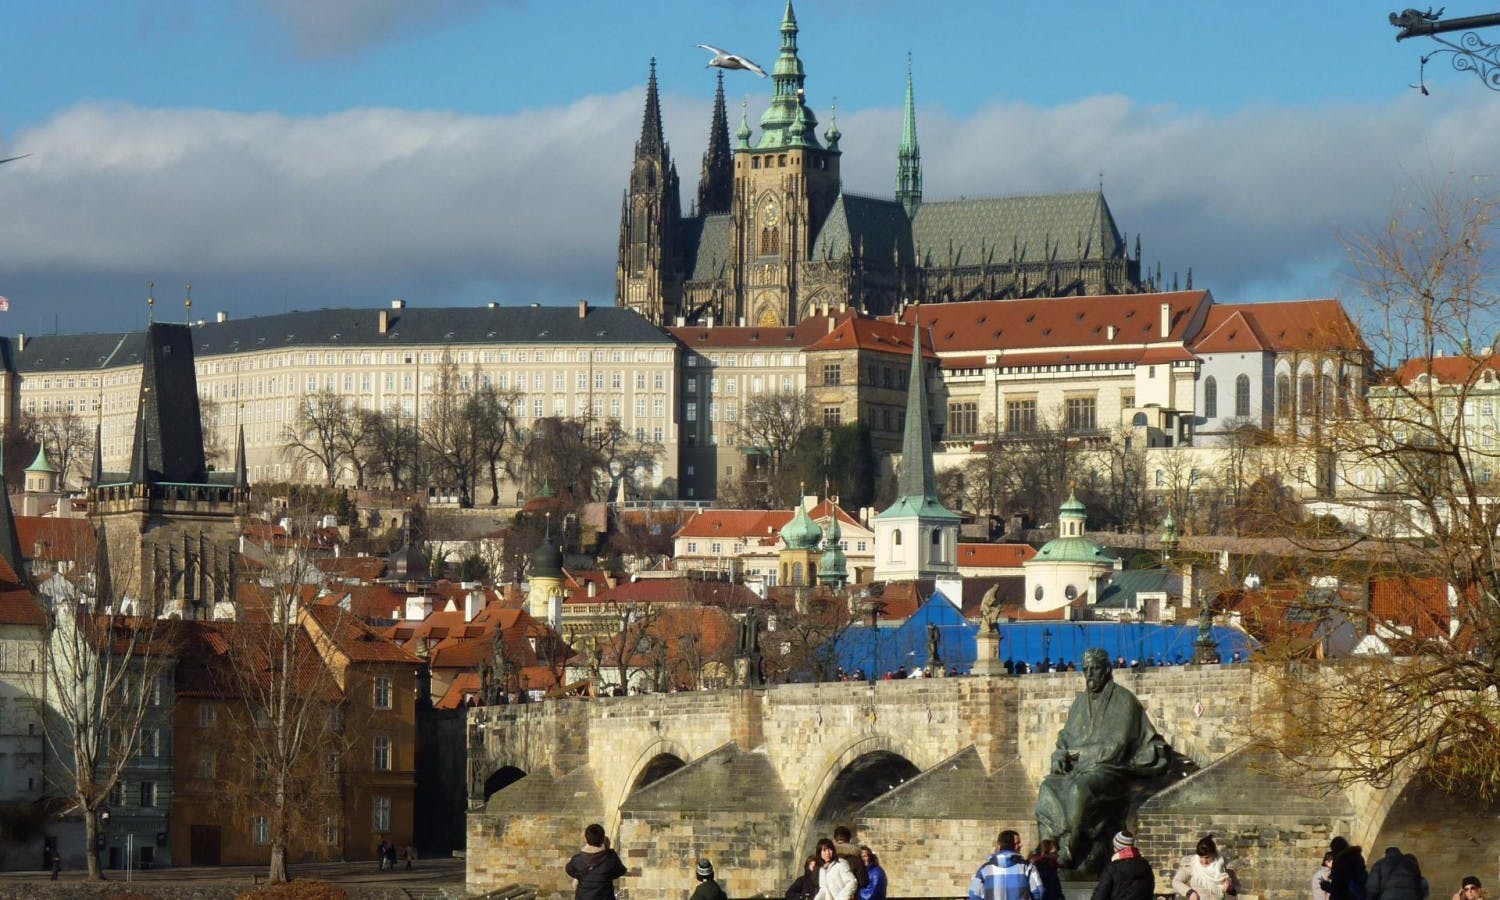 Prague full day sightseeing tour with river cruise and lunch1.jpg